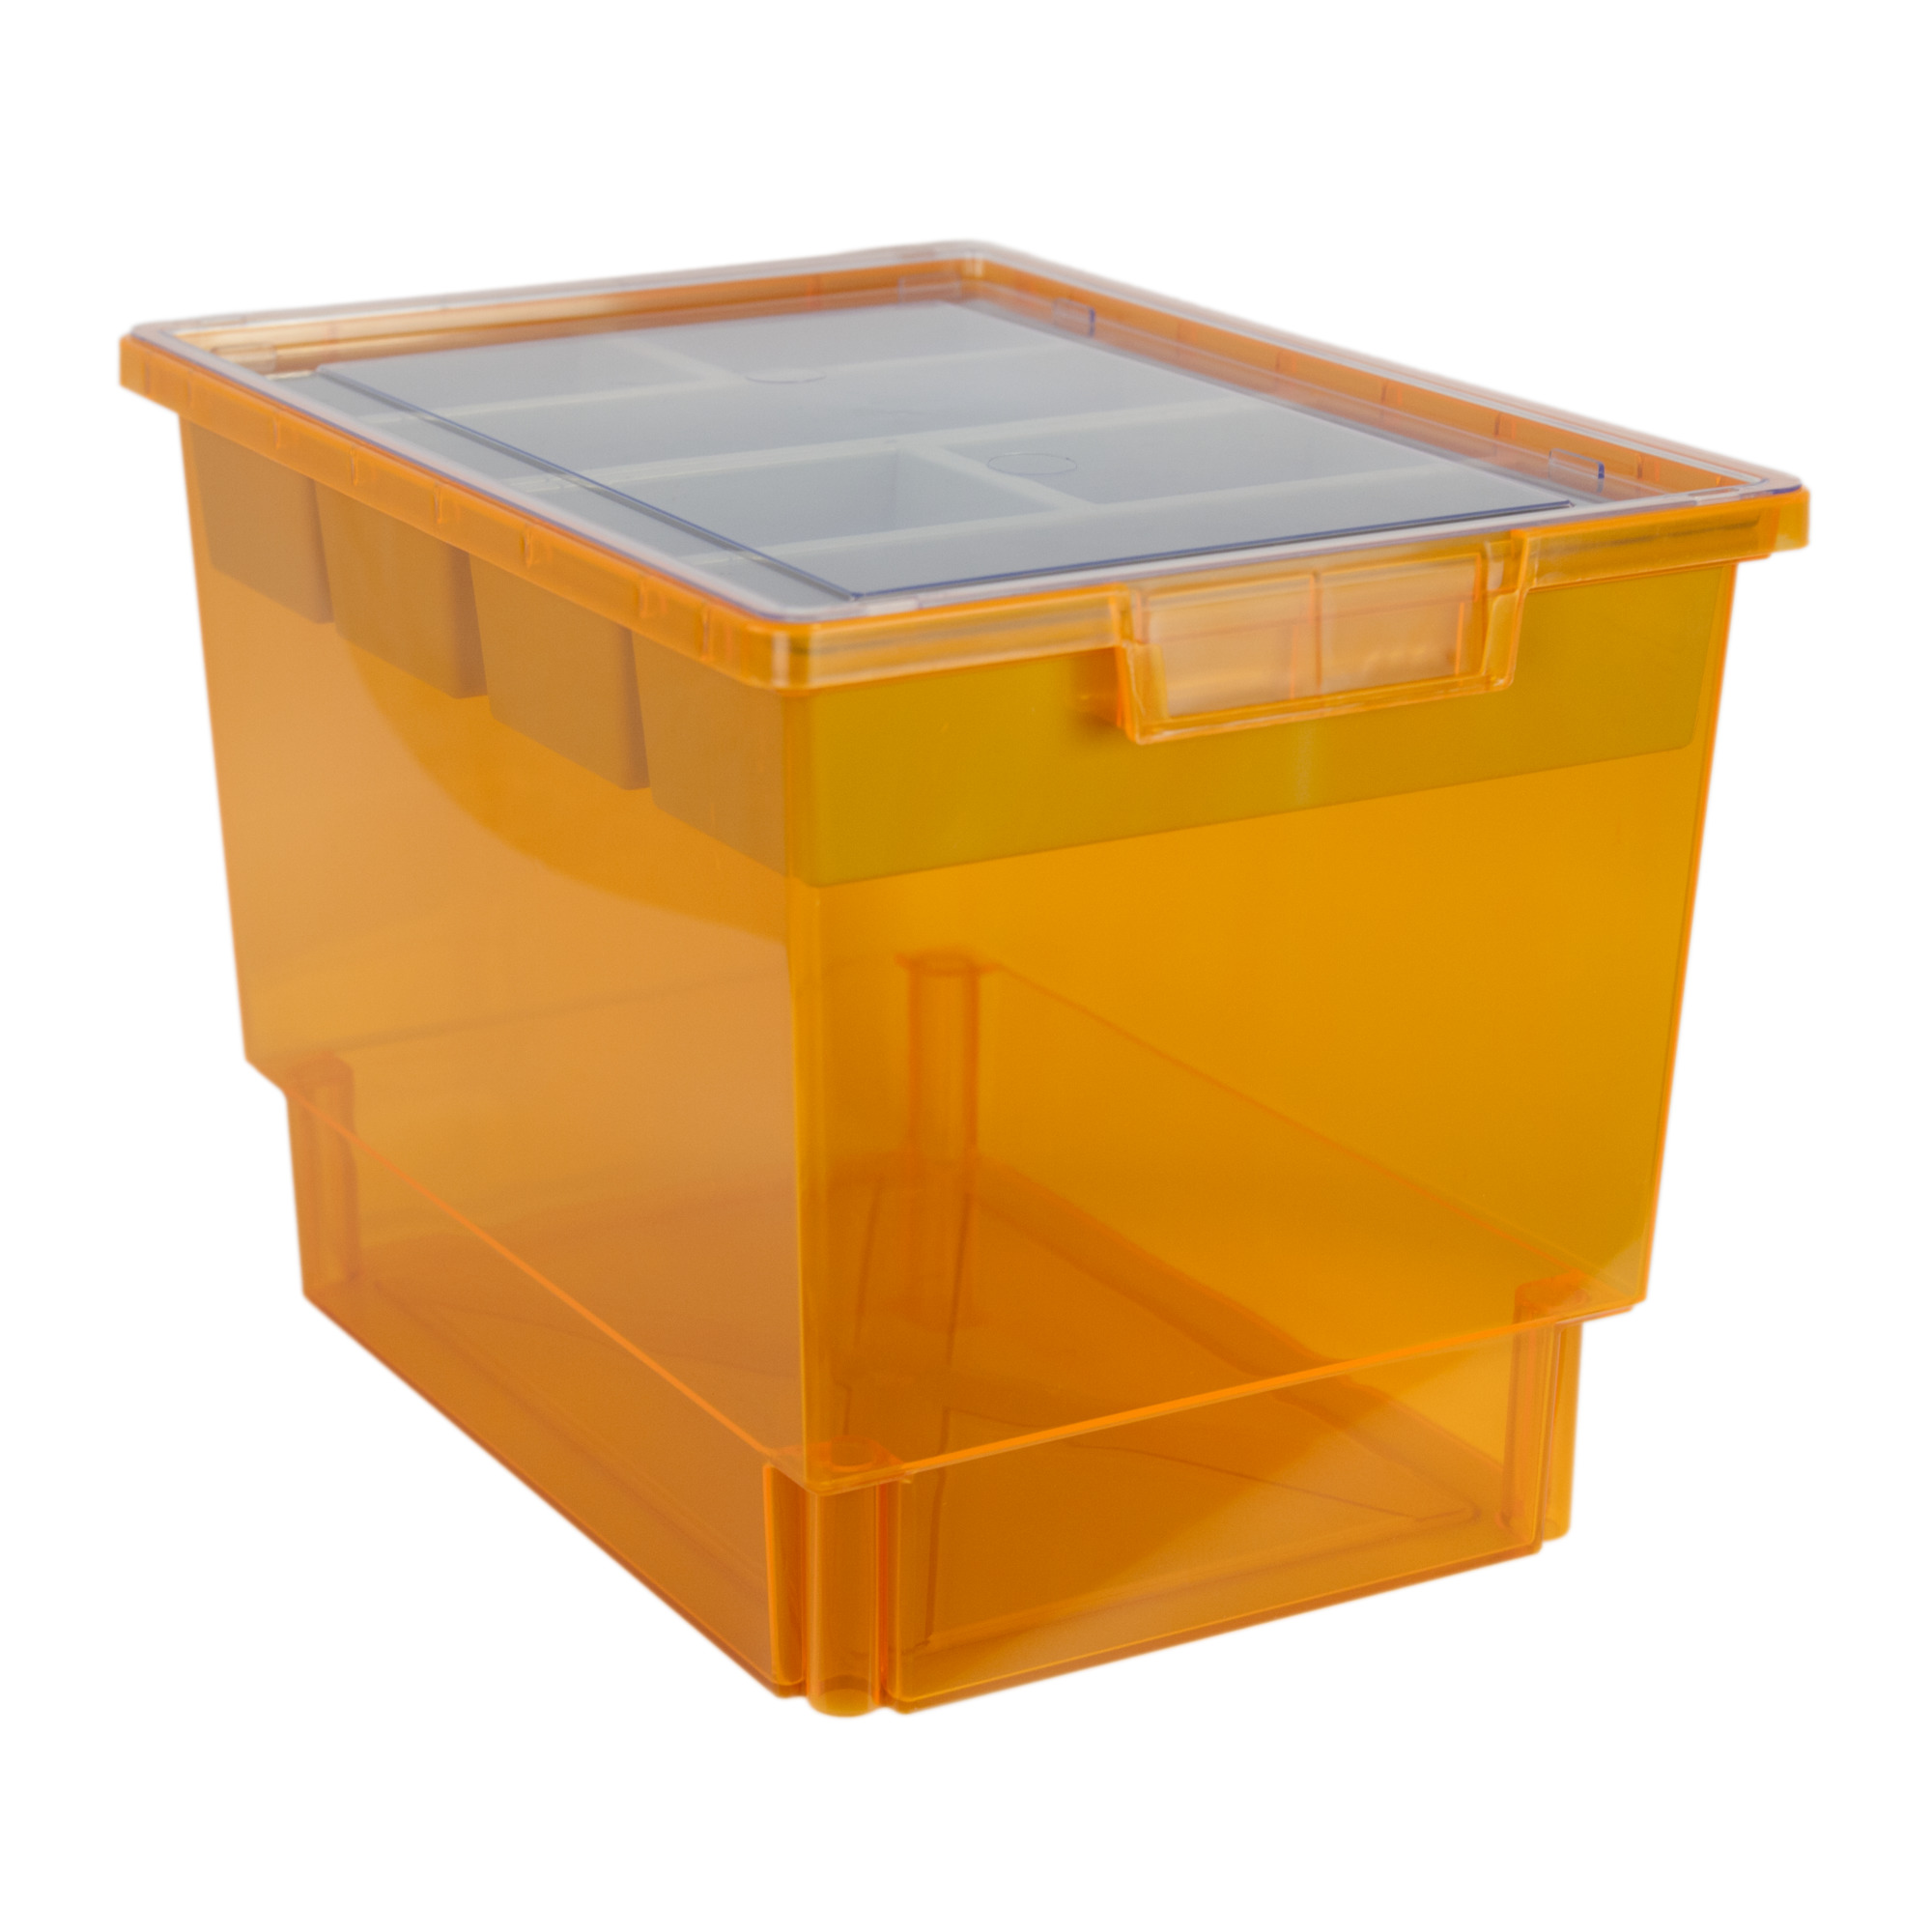 Certwood StorWerks, Slim Line 12Inch Tray Kit (3 x Divisions) Orange-3PK, Included (qty.) 3, Material Plastic, Height 9 in, Model CE1954FO-NK0202-3